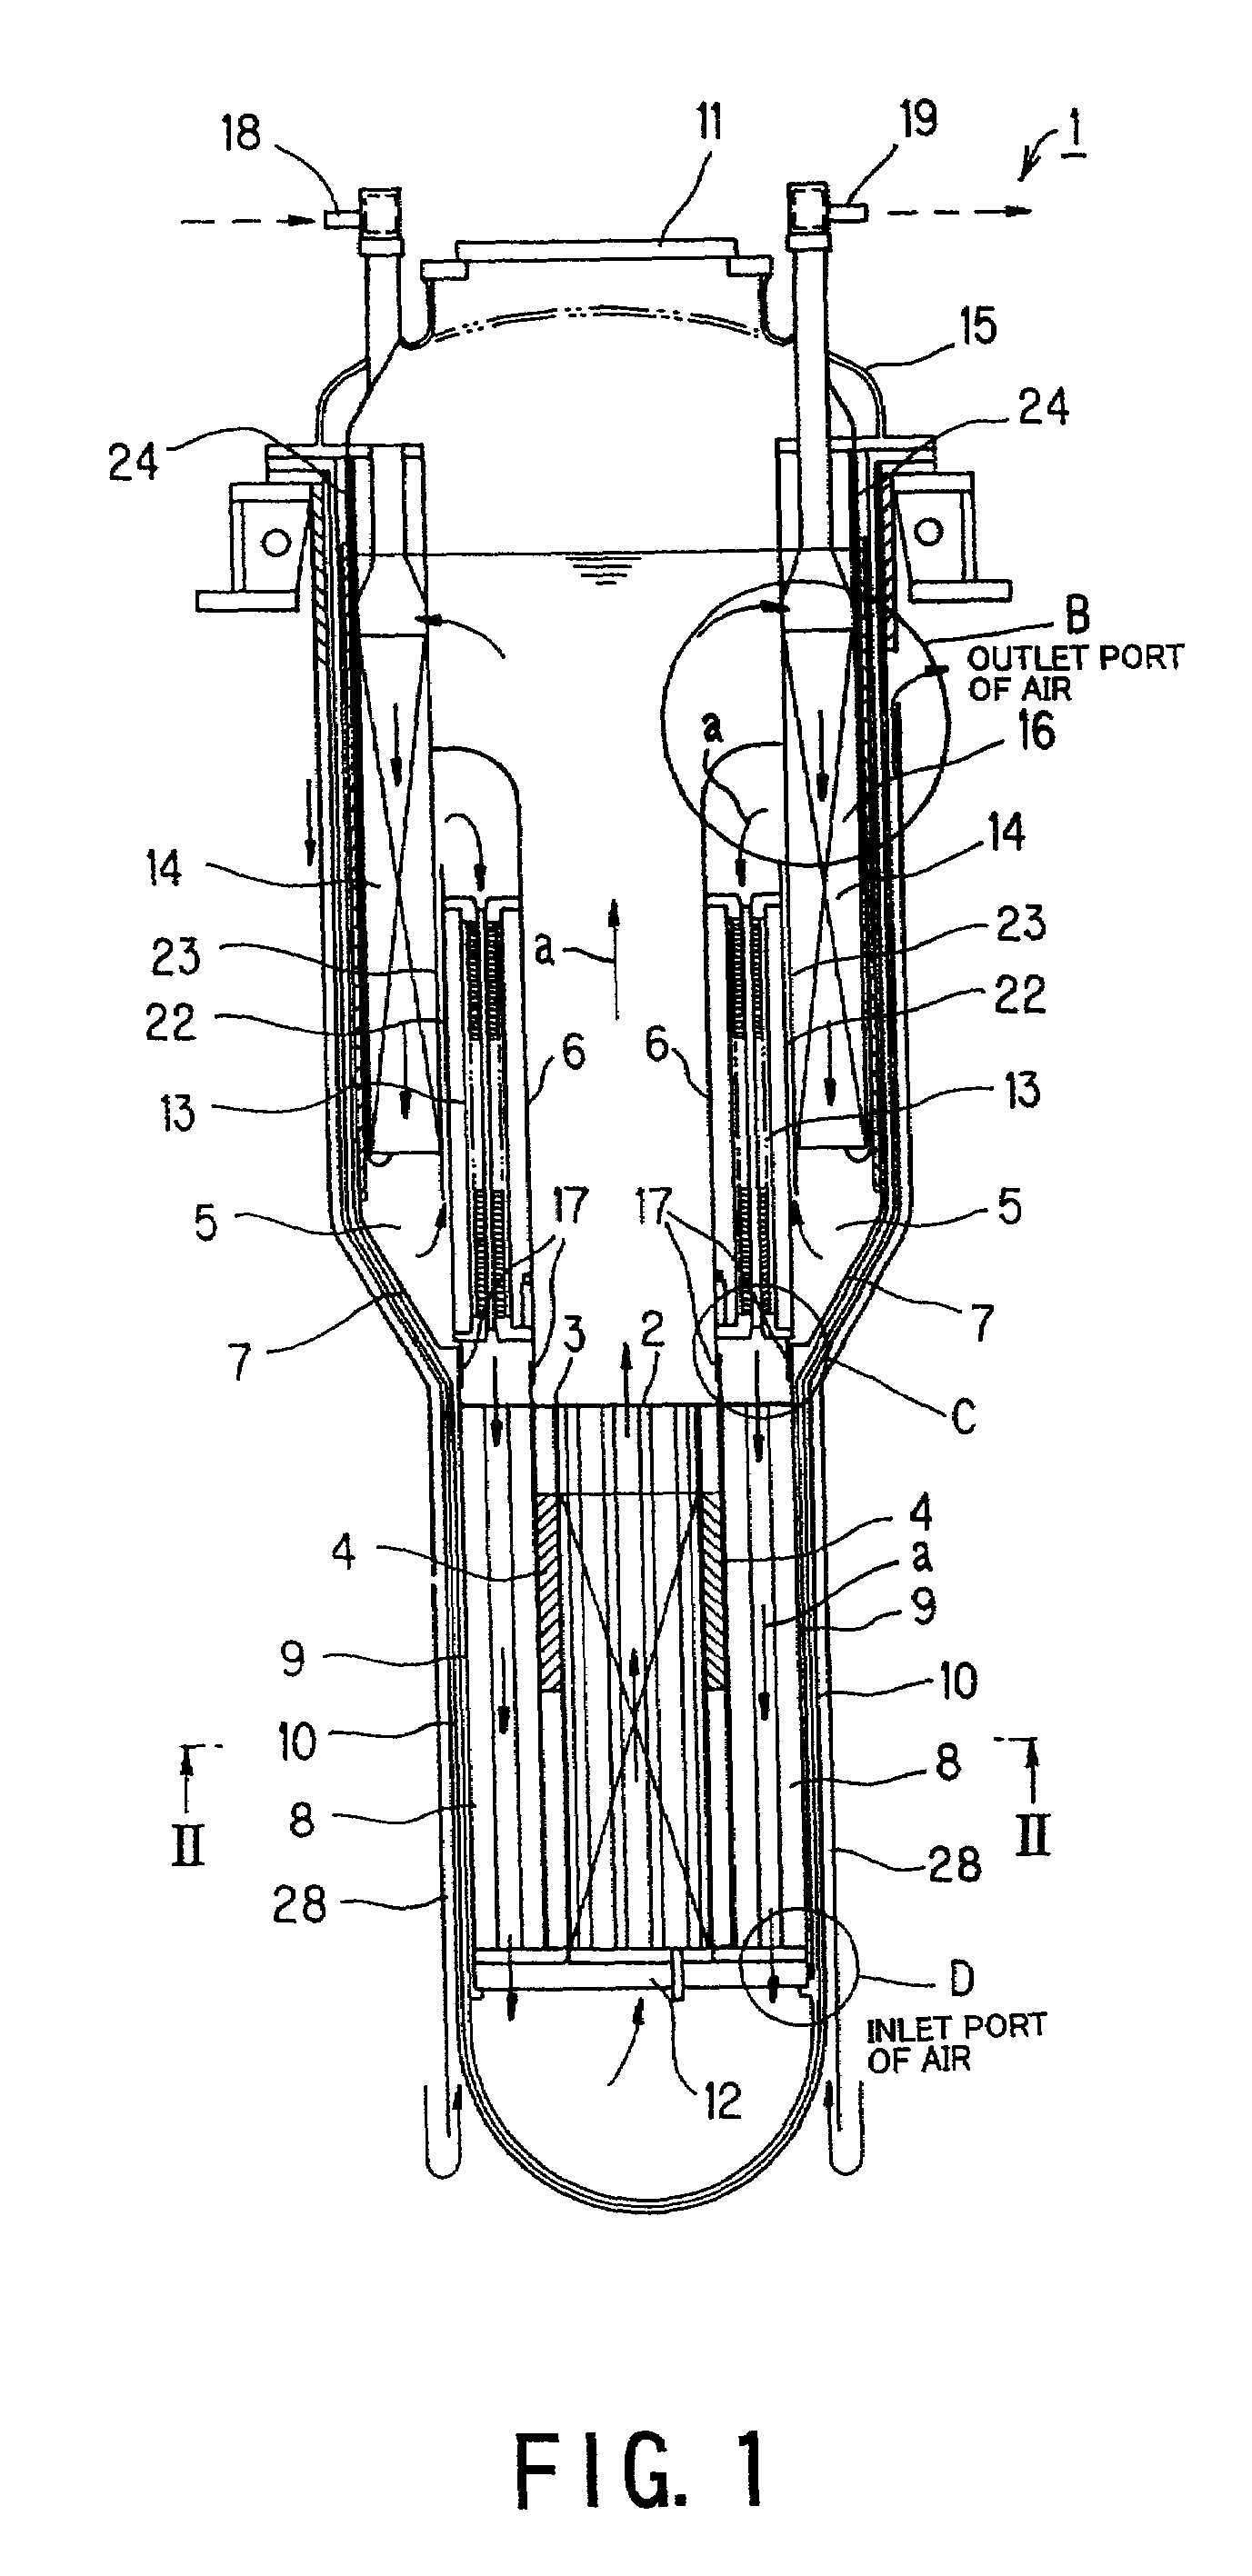 Reactivity control rod for core